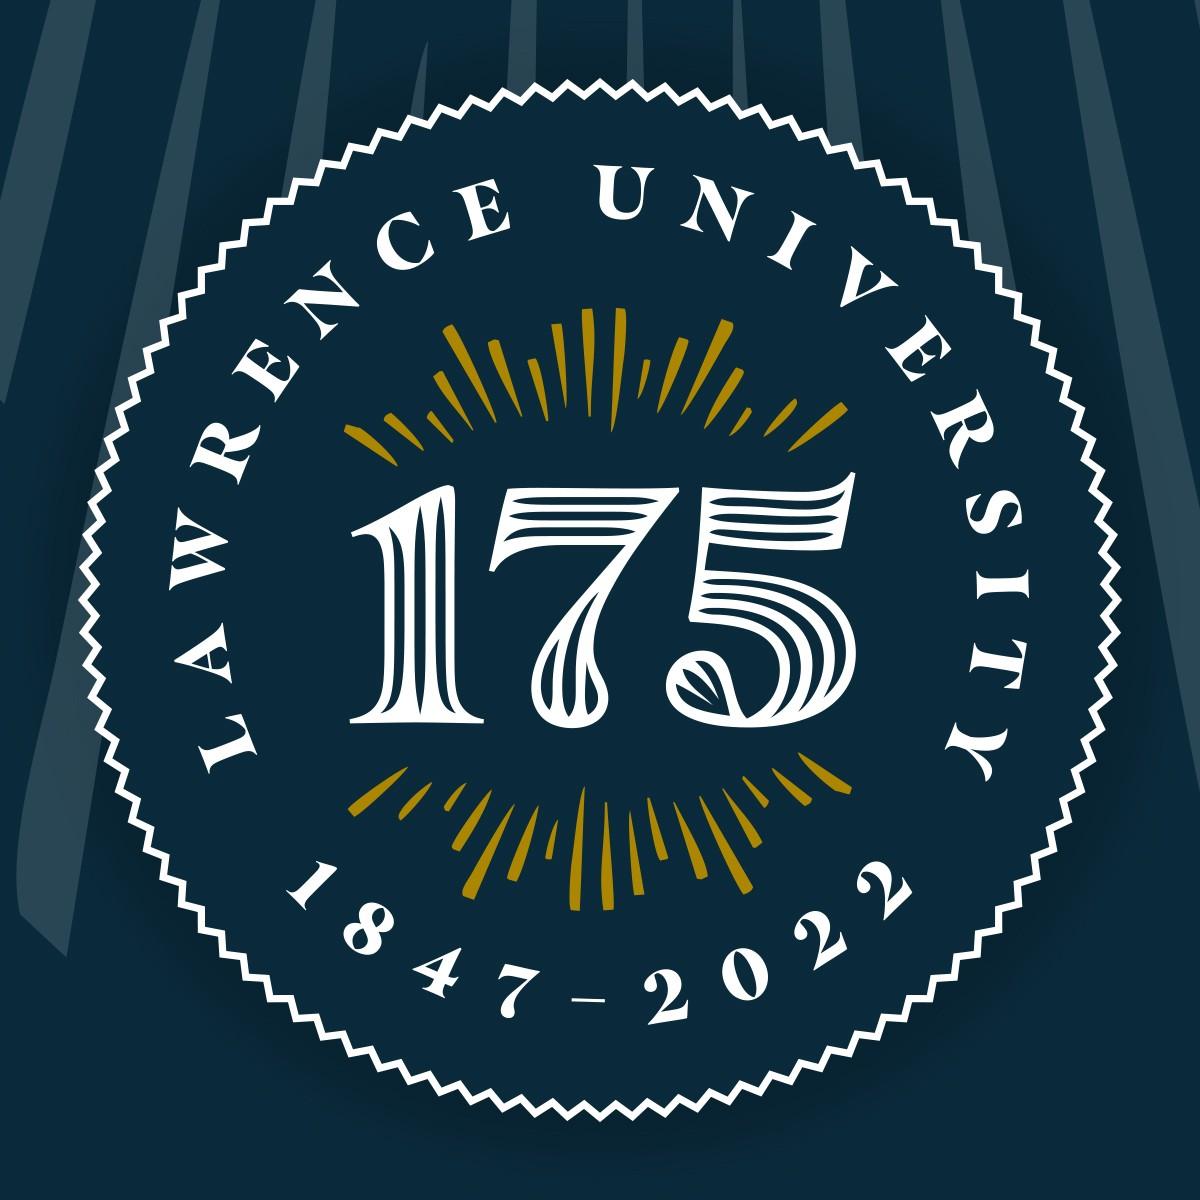 The words "Lawrence University 1847-2022" arranged in circle around the numbers "175"